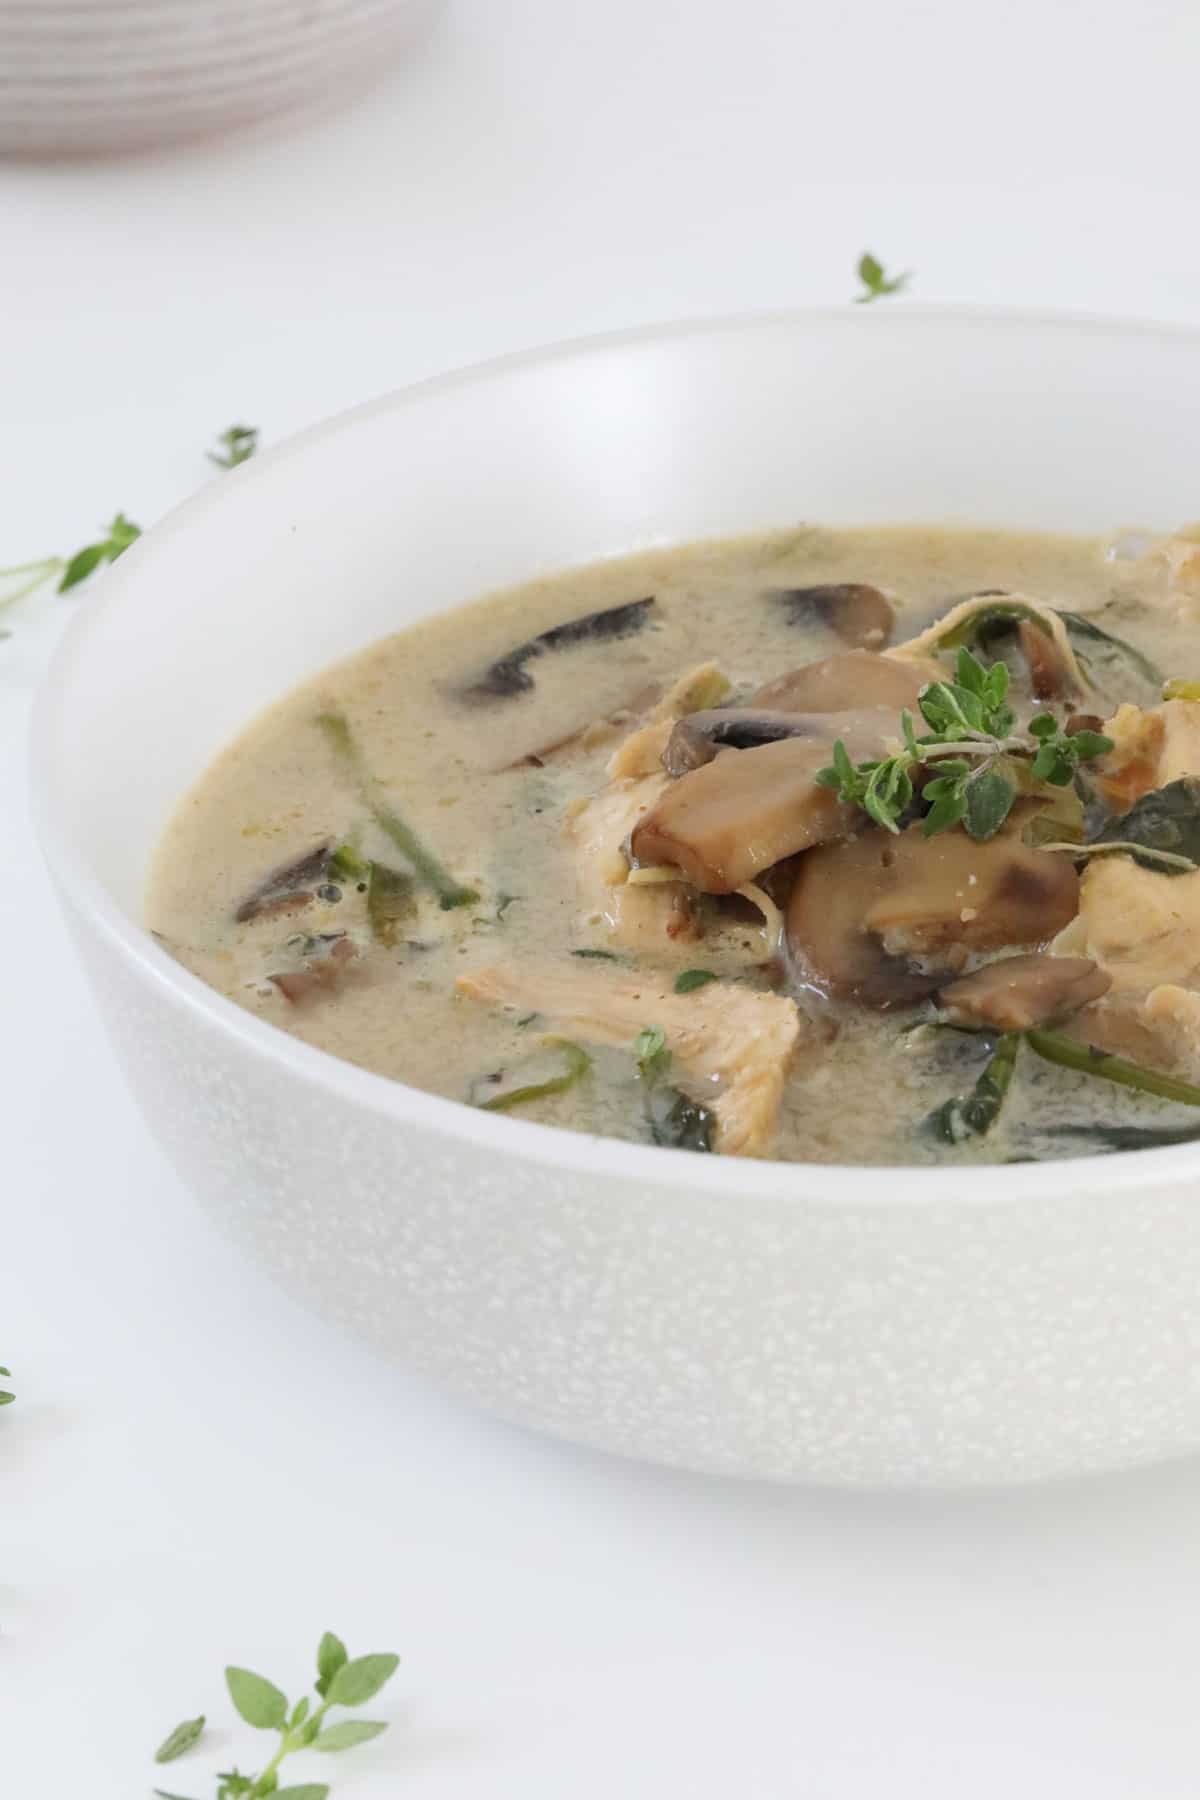 A bowl of chicken and mushroom soup on a table with fresh herbs